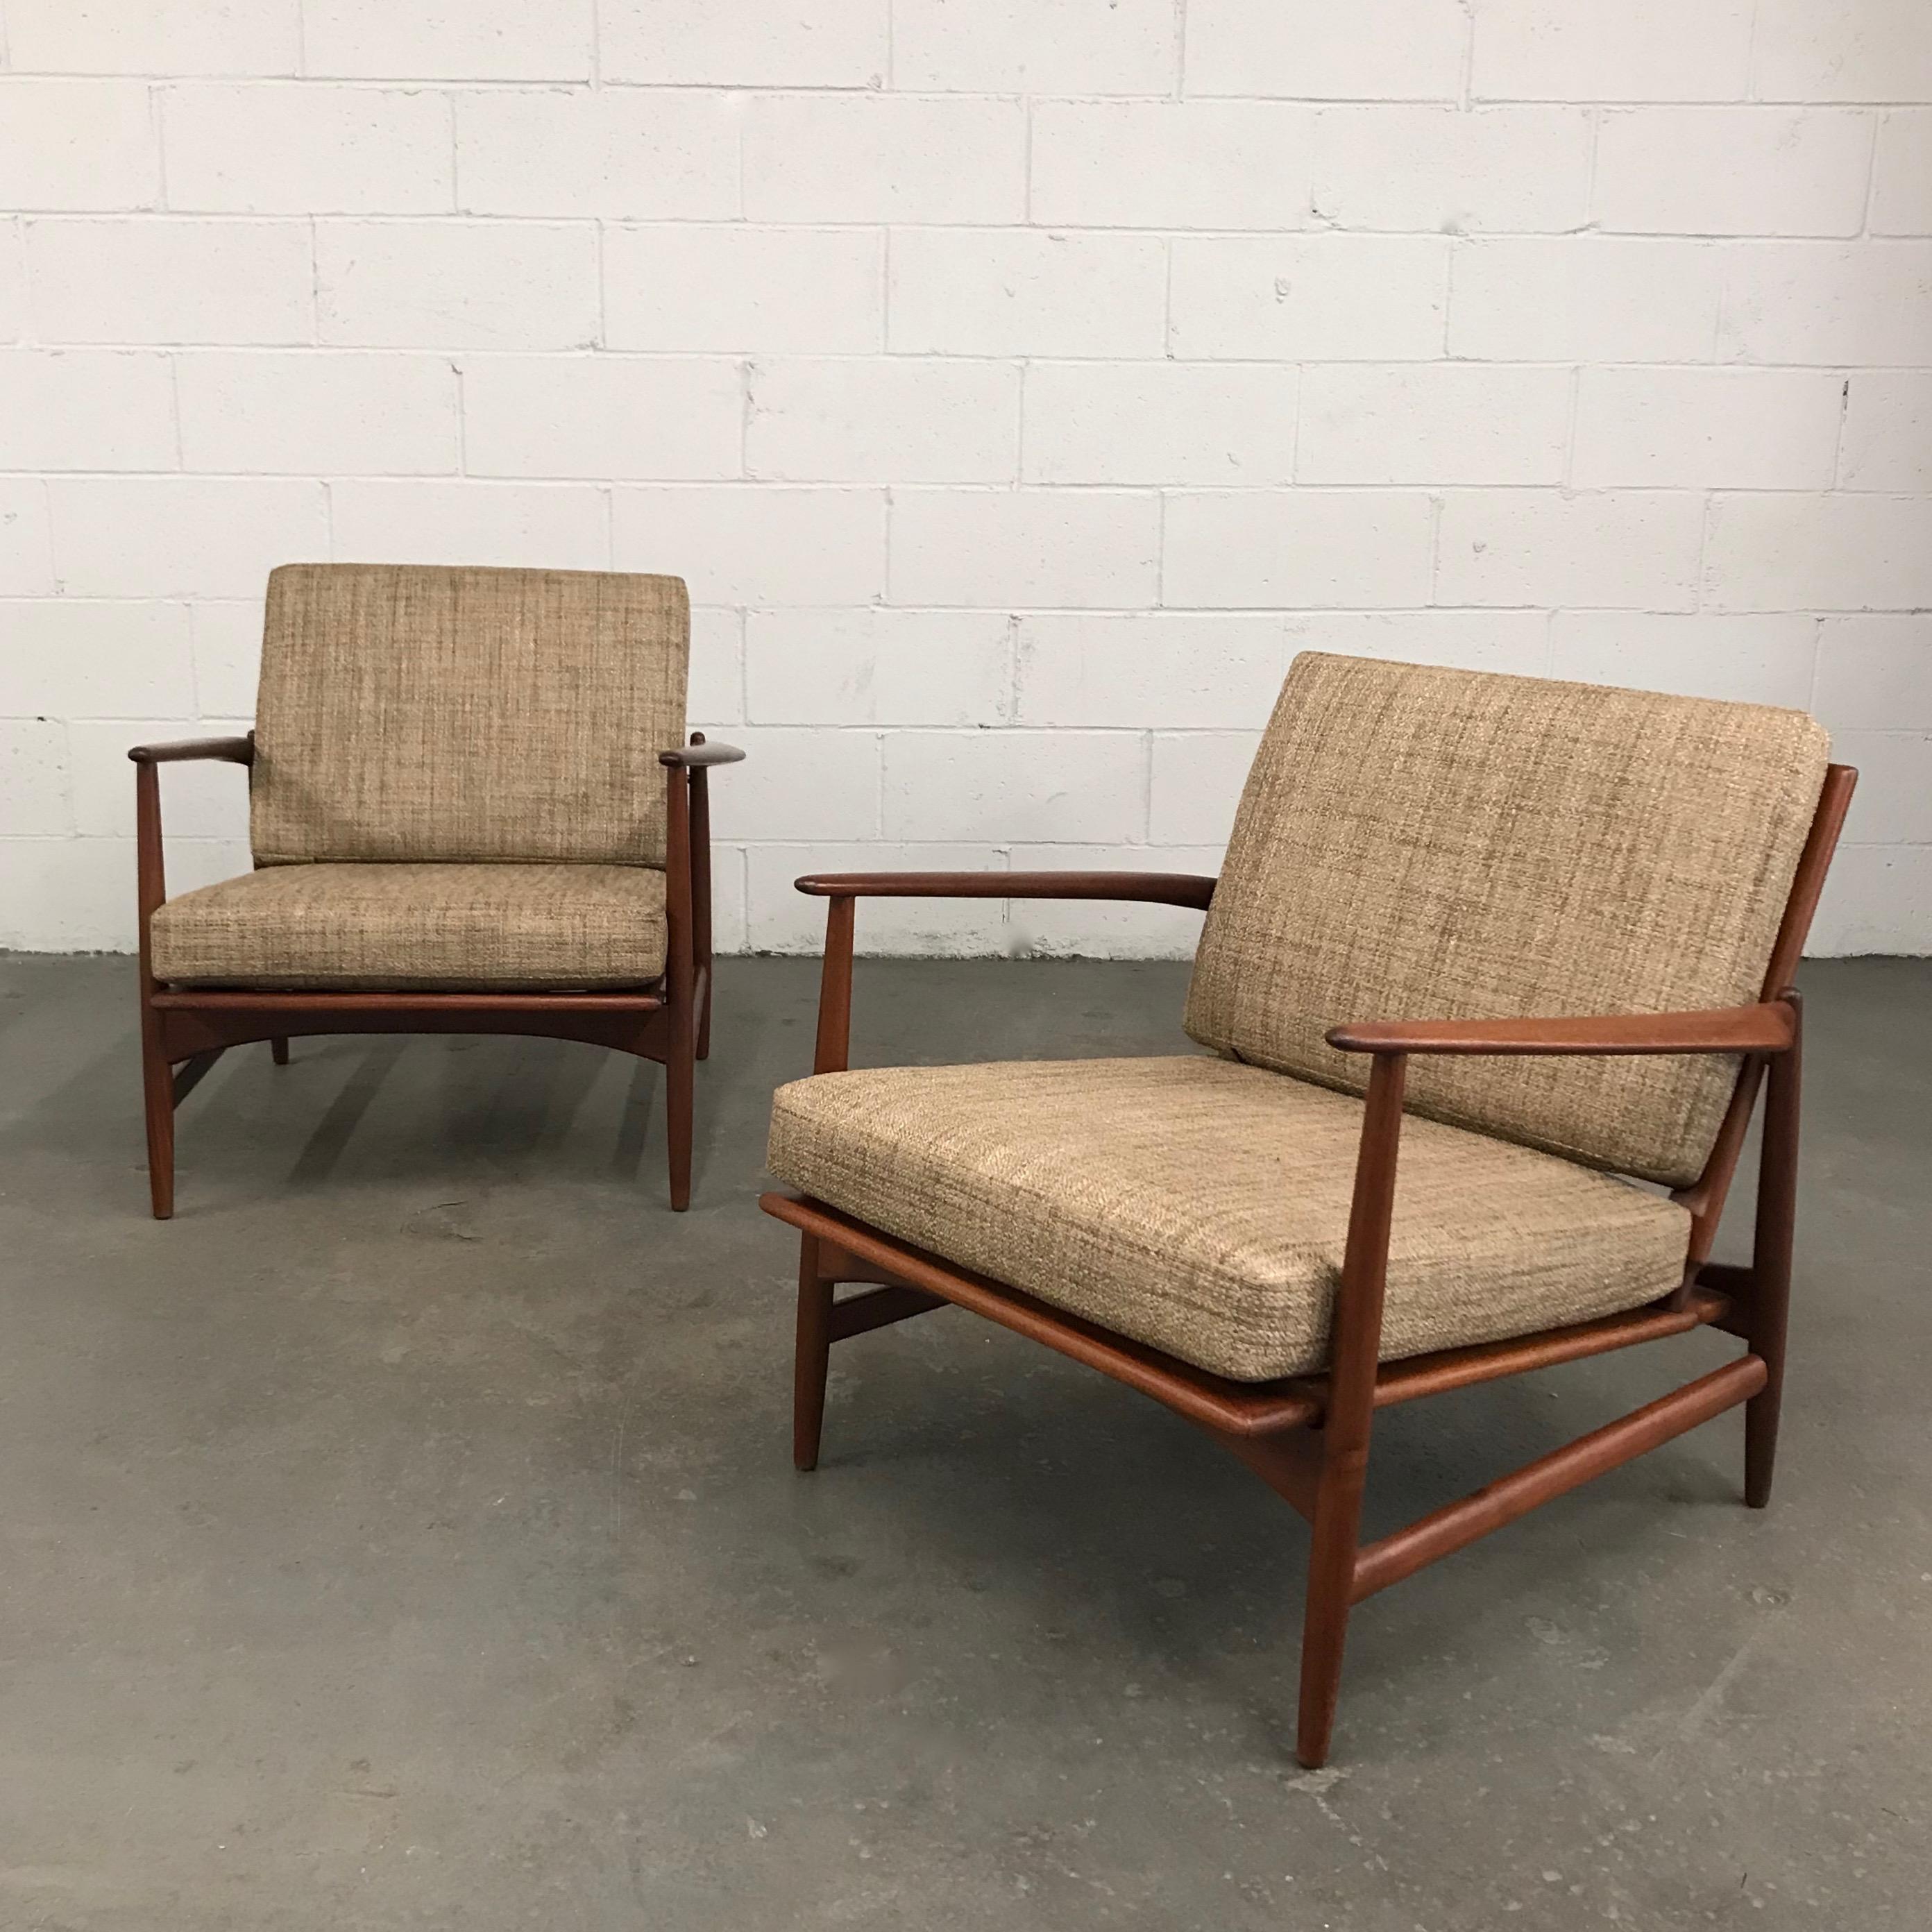 Pair of Danish modern, lounge chairs by Ib Kofod Larsen for Selig feature beautifully detailed, teak frames with linen blend, tweed cushions.